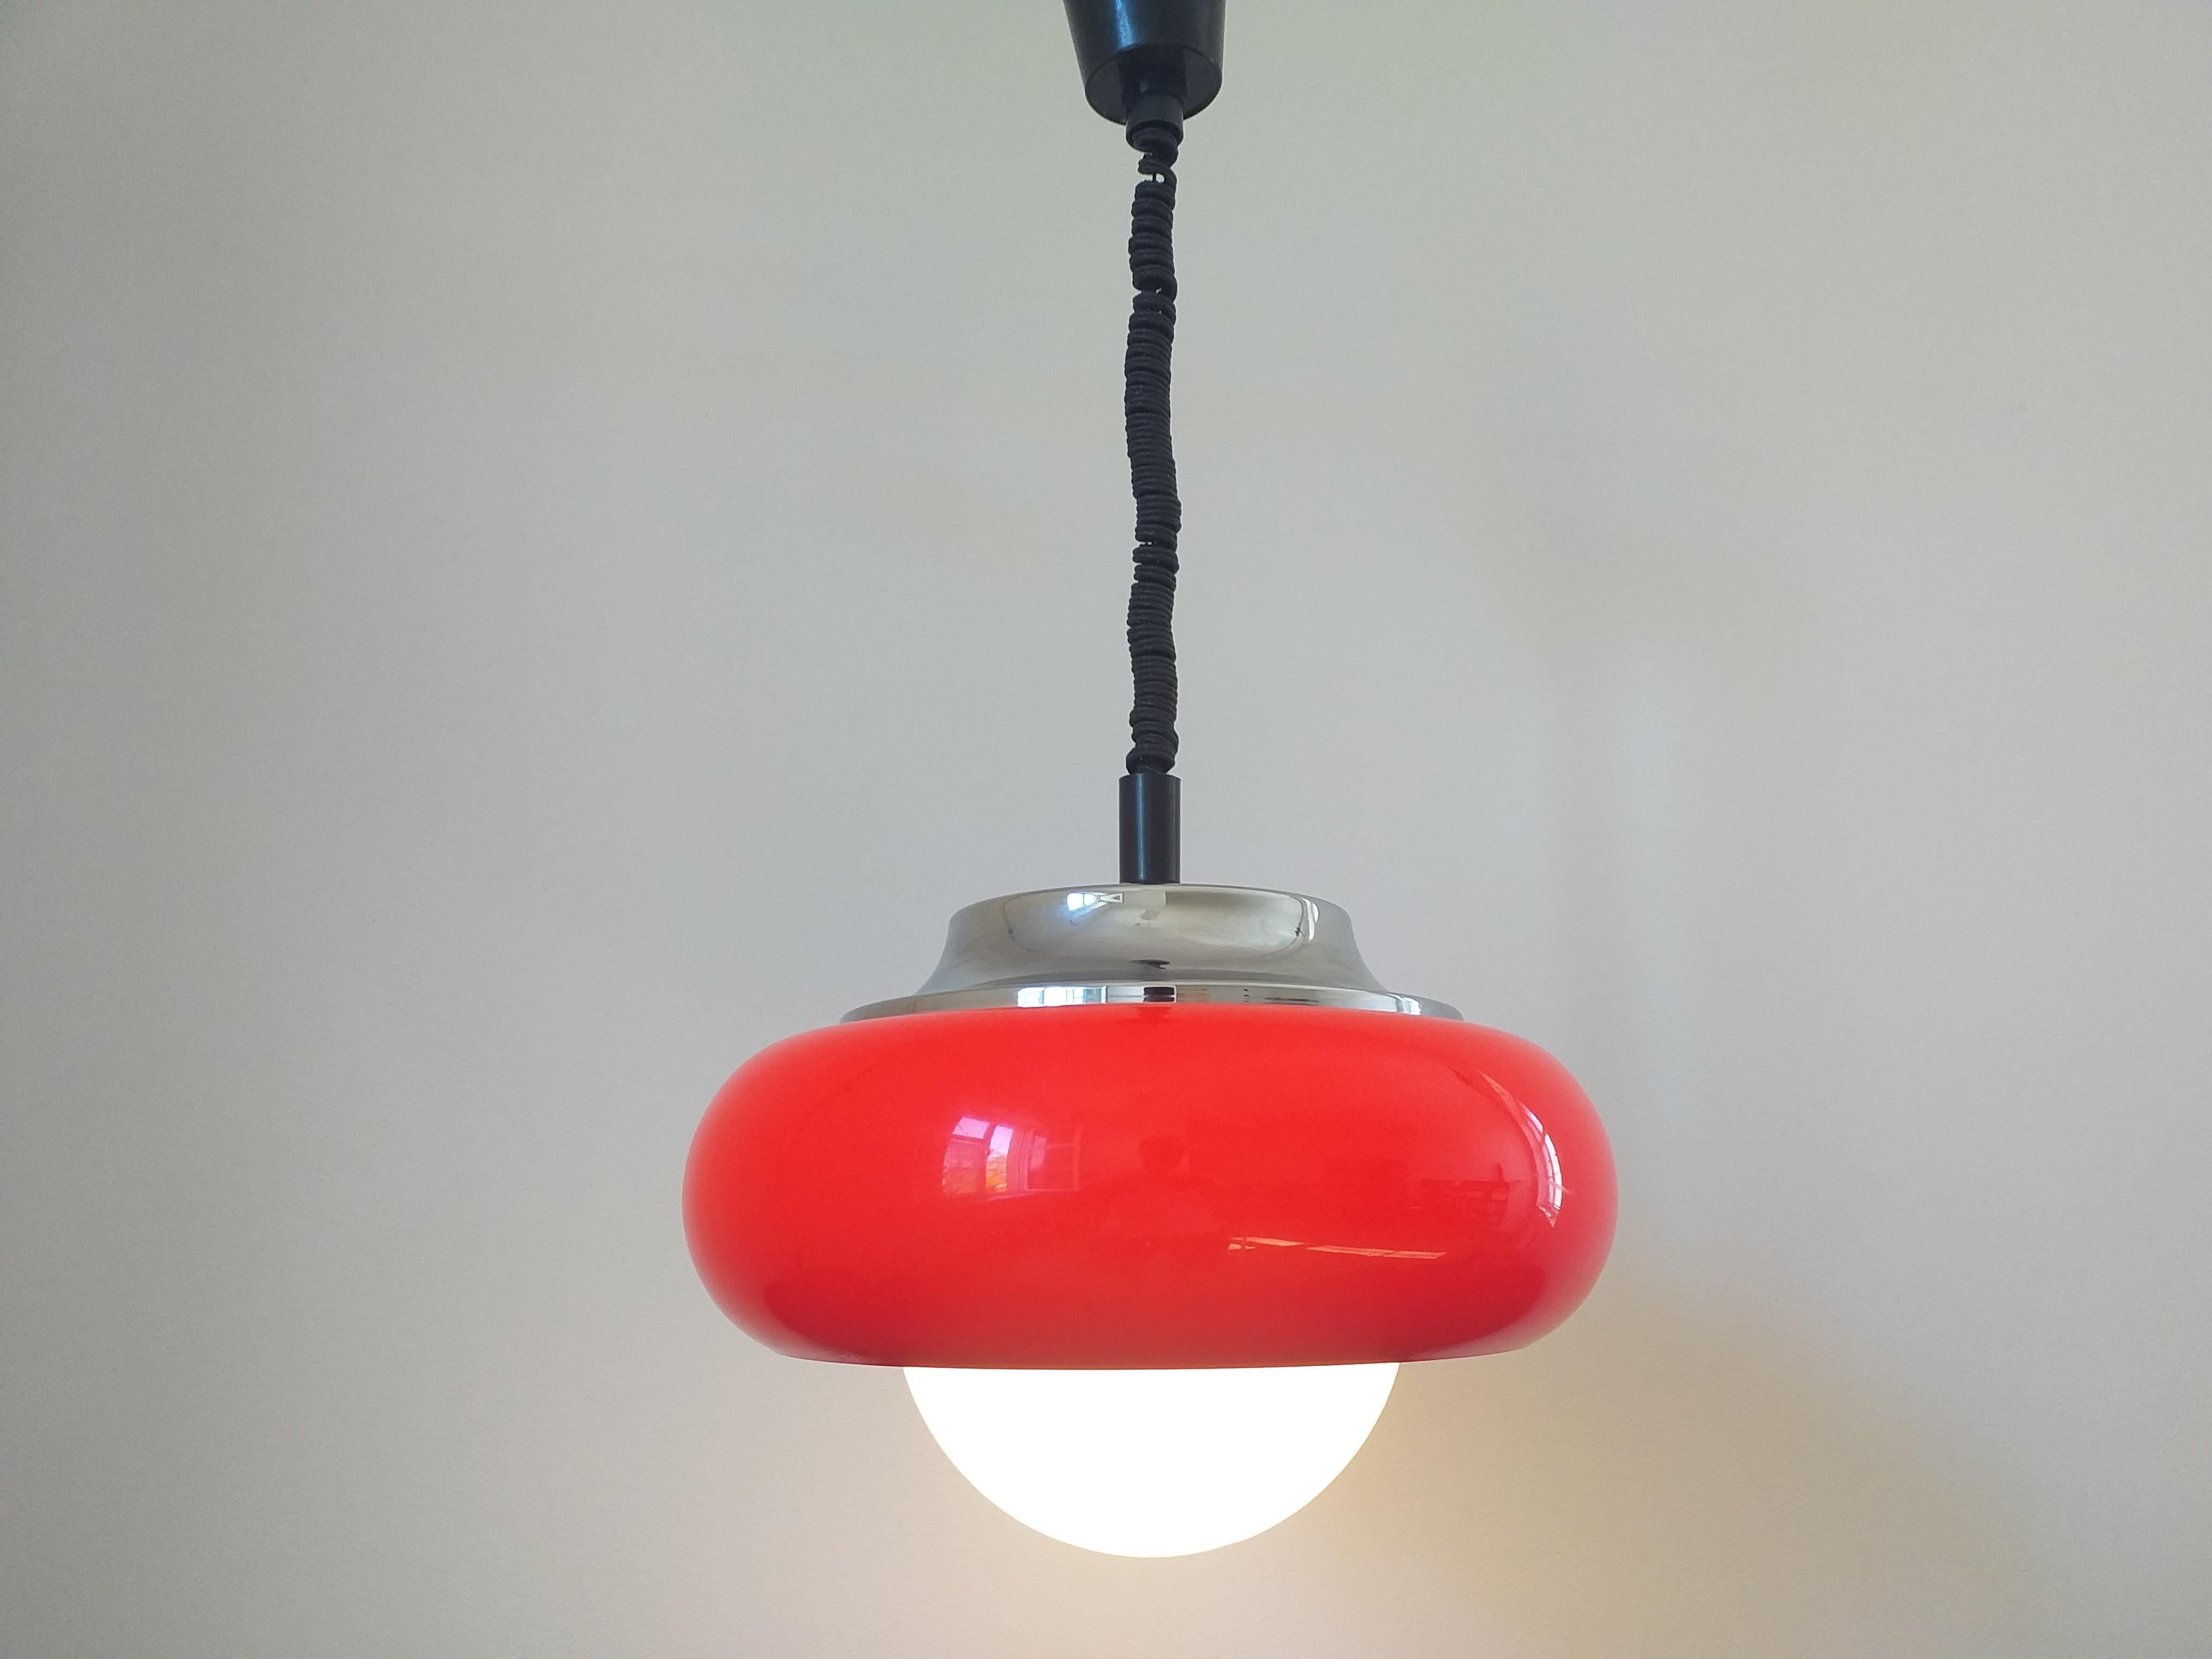 - Very nice style of lighting
- Space Age style
- In red color is rare
- Adjustable
- Marked by label.